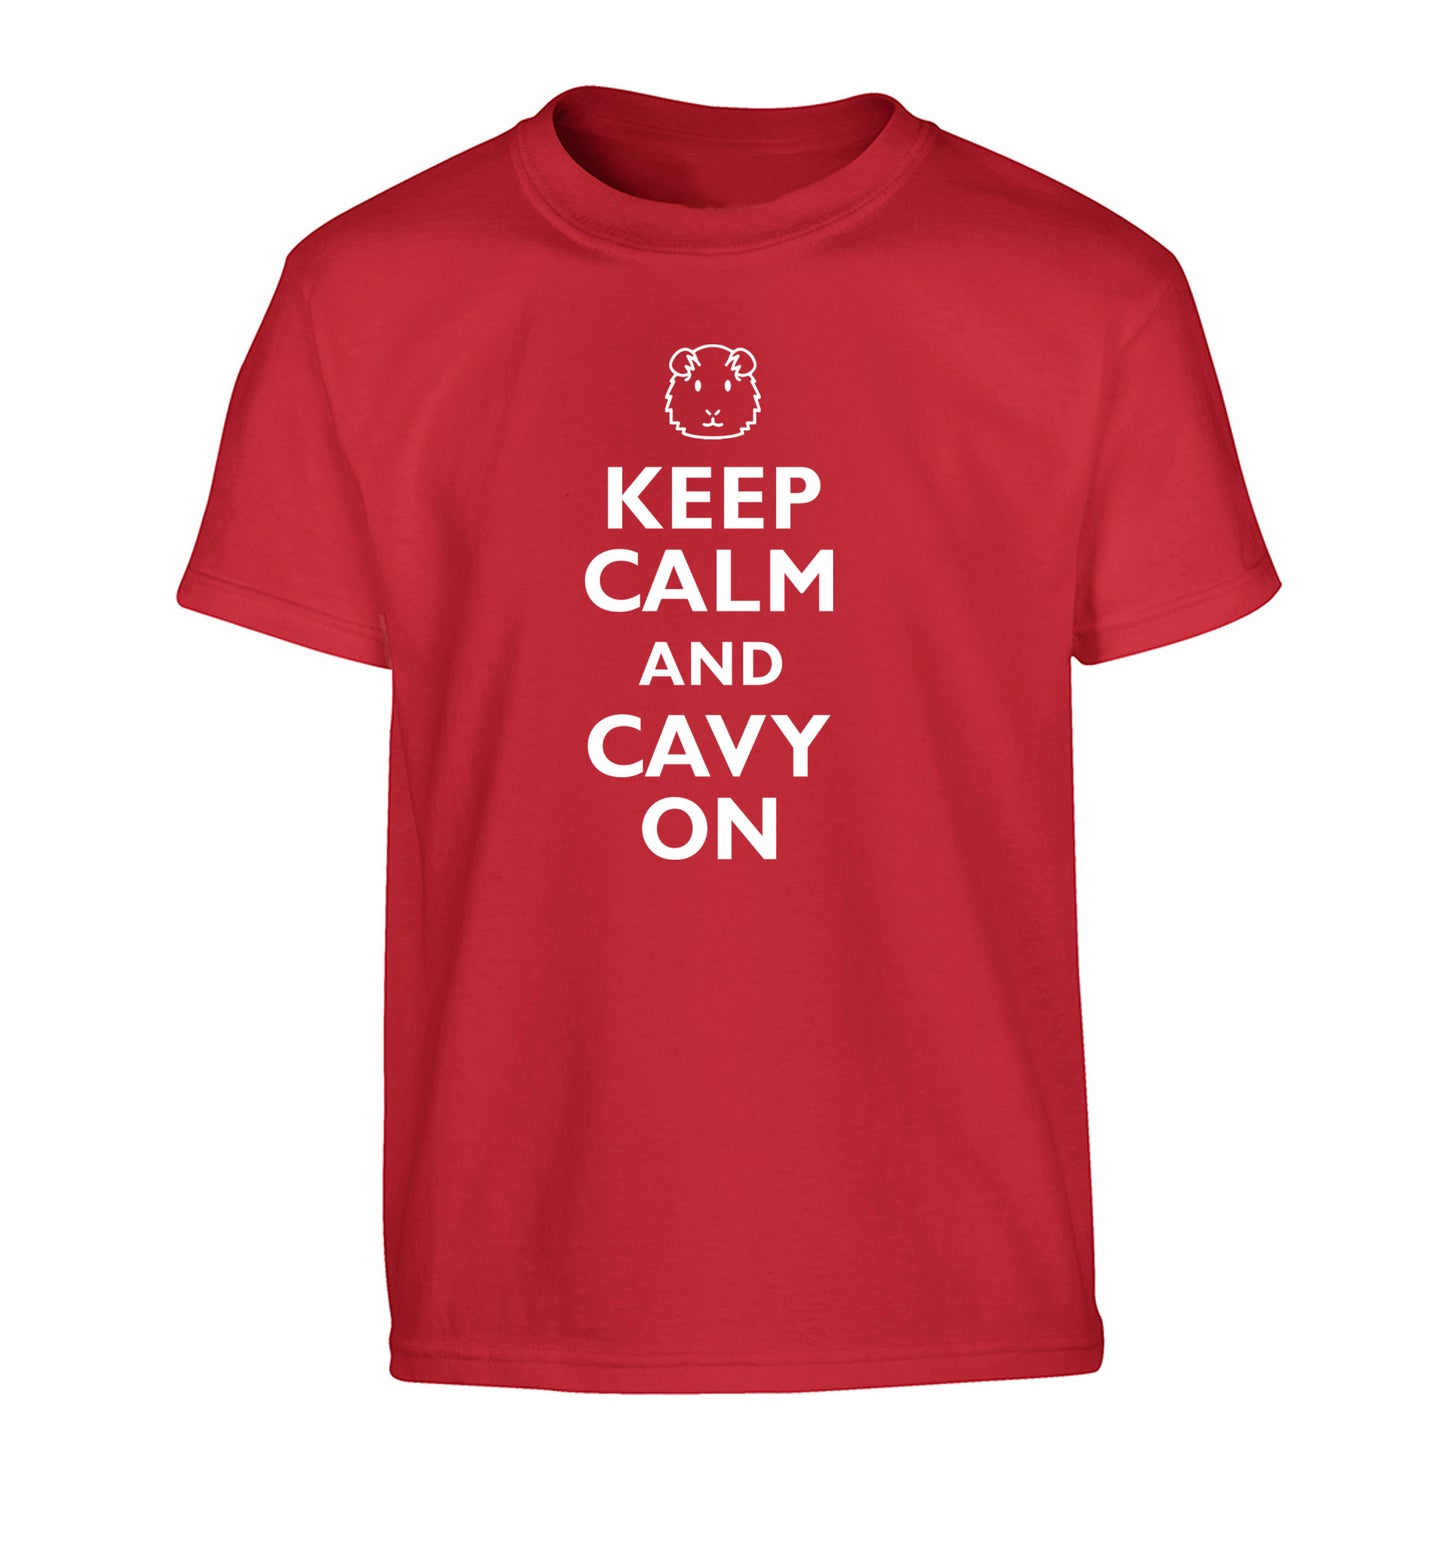 Keep calm and cavvy on Children's red Tshirt 12-14 Years